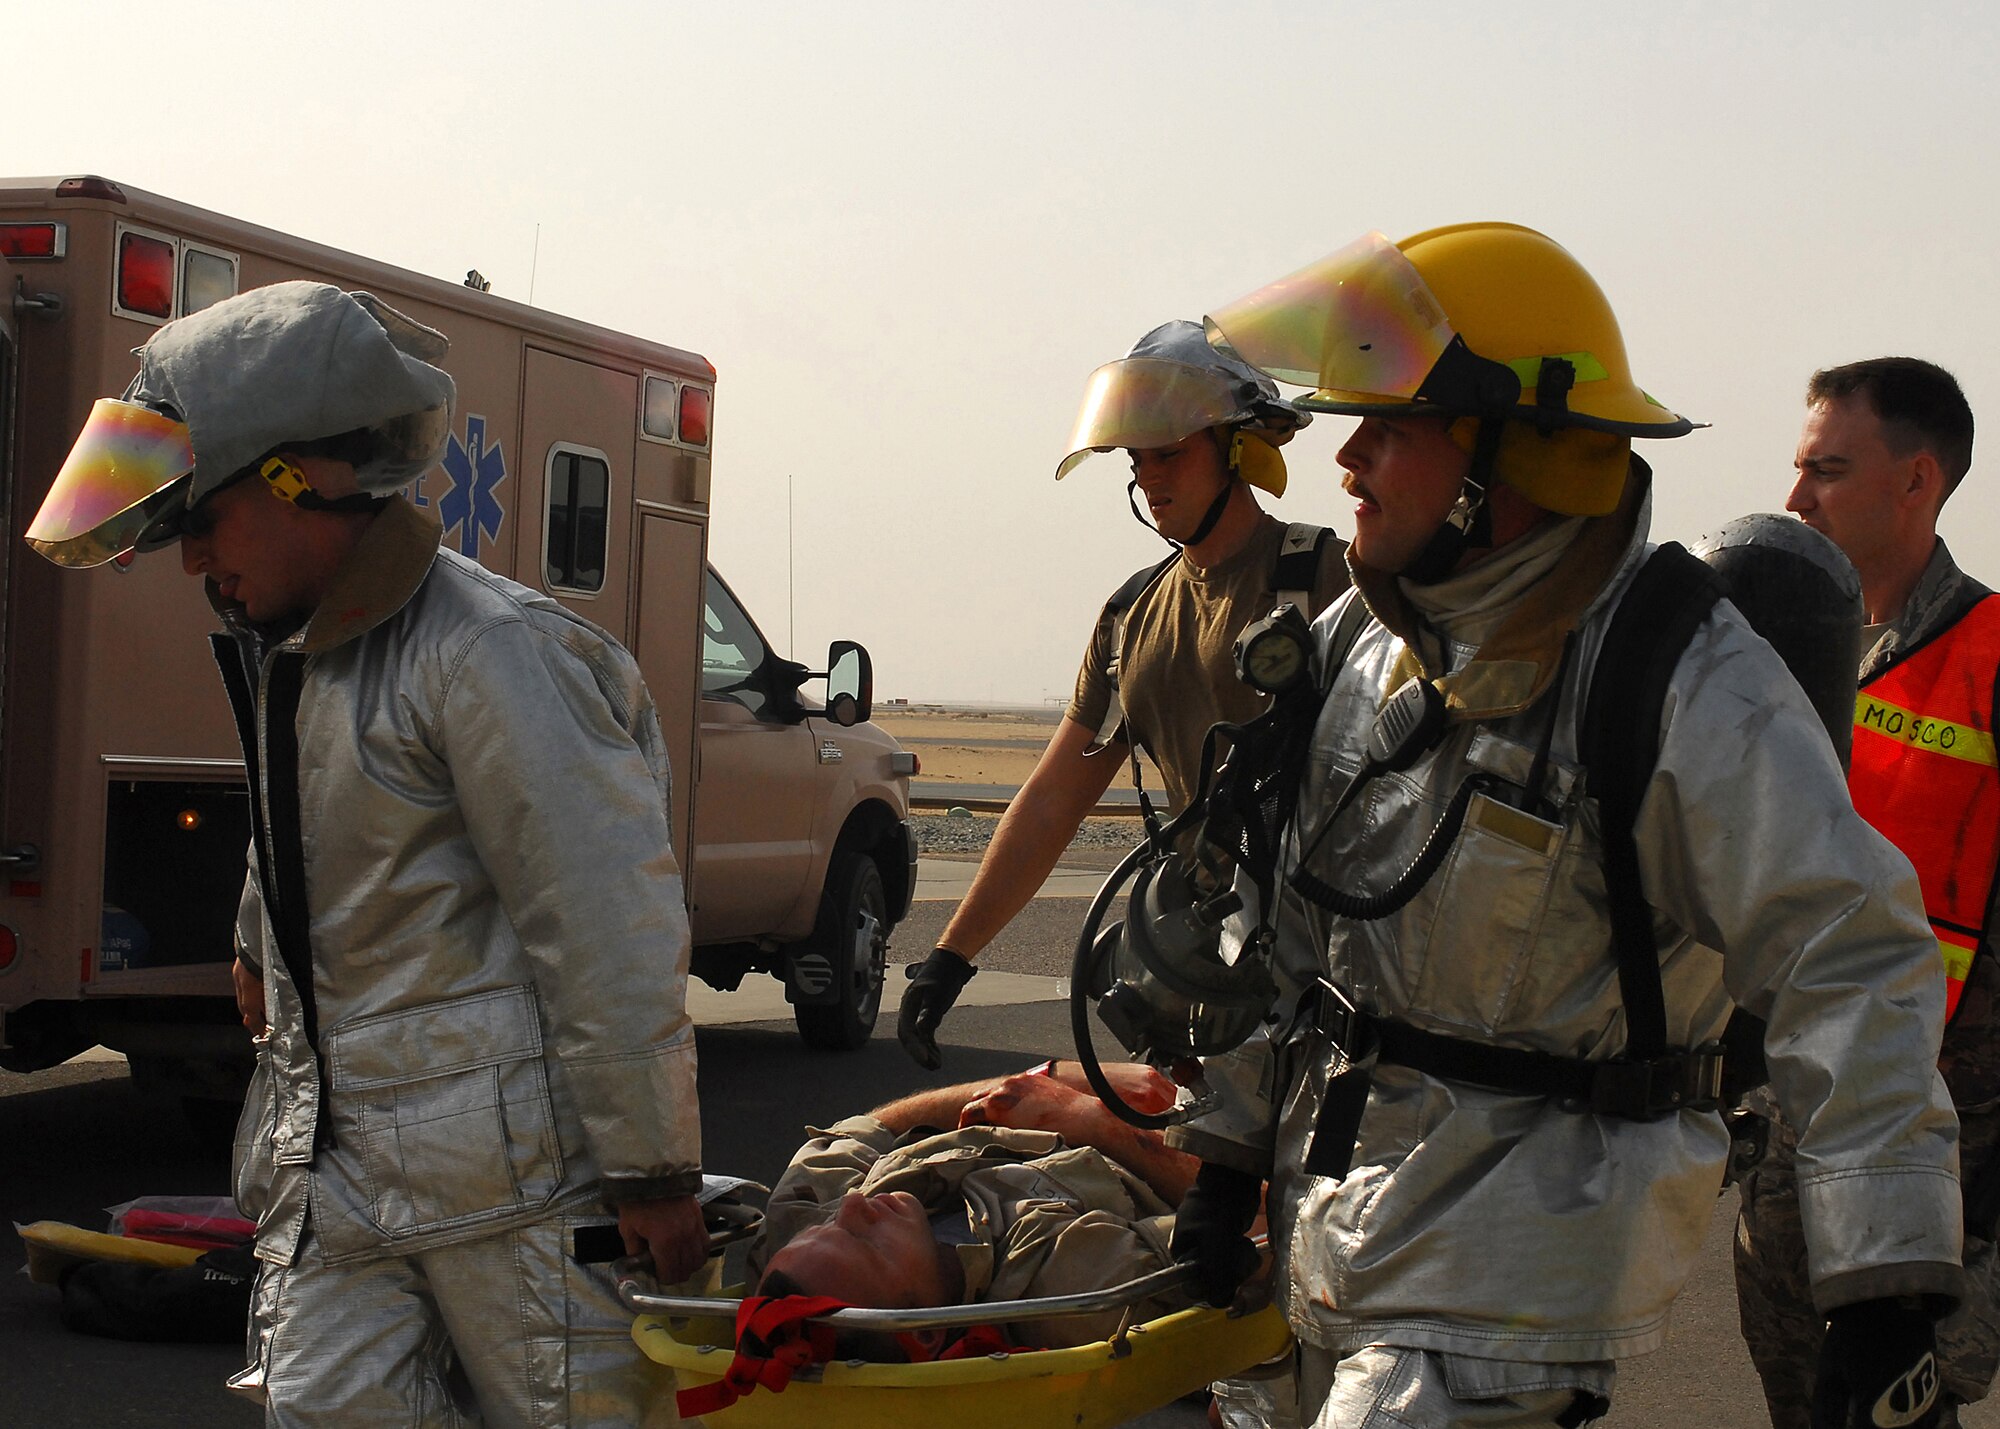 SOUTHWEST ASIA -- Firefighters and medical personnel from the 386th Air Expeditionary Wing transport a patient to an ambulance during a mass casualty exercise on Oct. 29 at an air base in Southwest Asia. The exercise tested the 386th Air Expeditionary Wing's ability to respond to a major accident in a deployed environment. (U.S. Air Force photo/Airman 1st Class Nicole Brosseau)